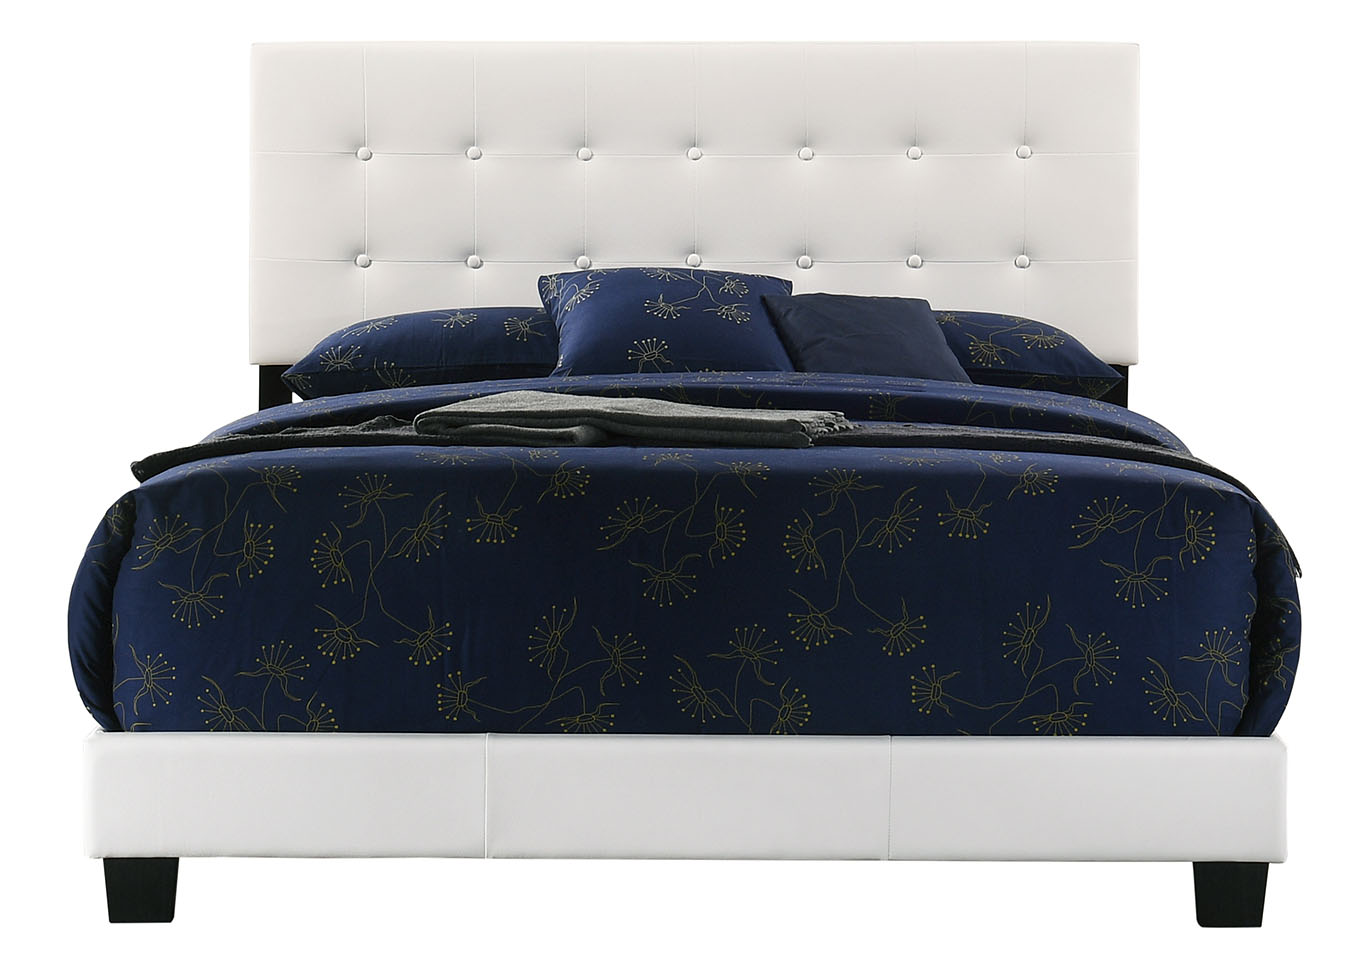 Caldwell White Queen Bed,Glory Furniture